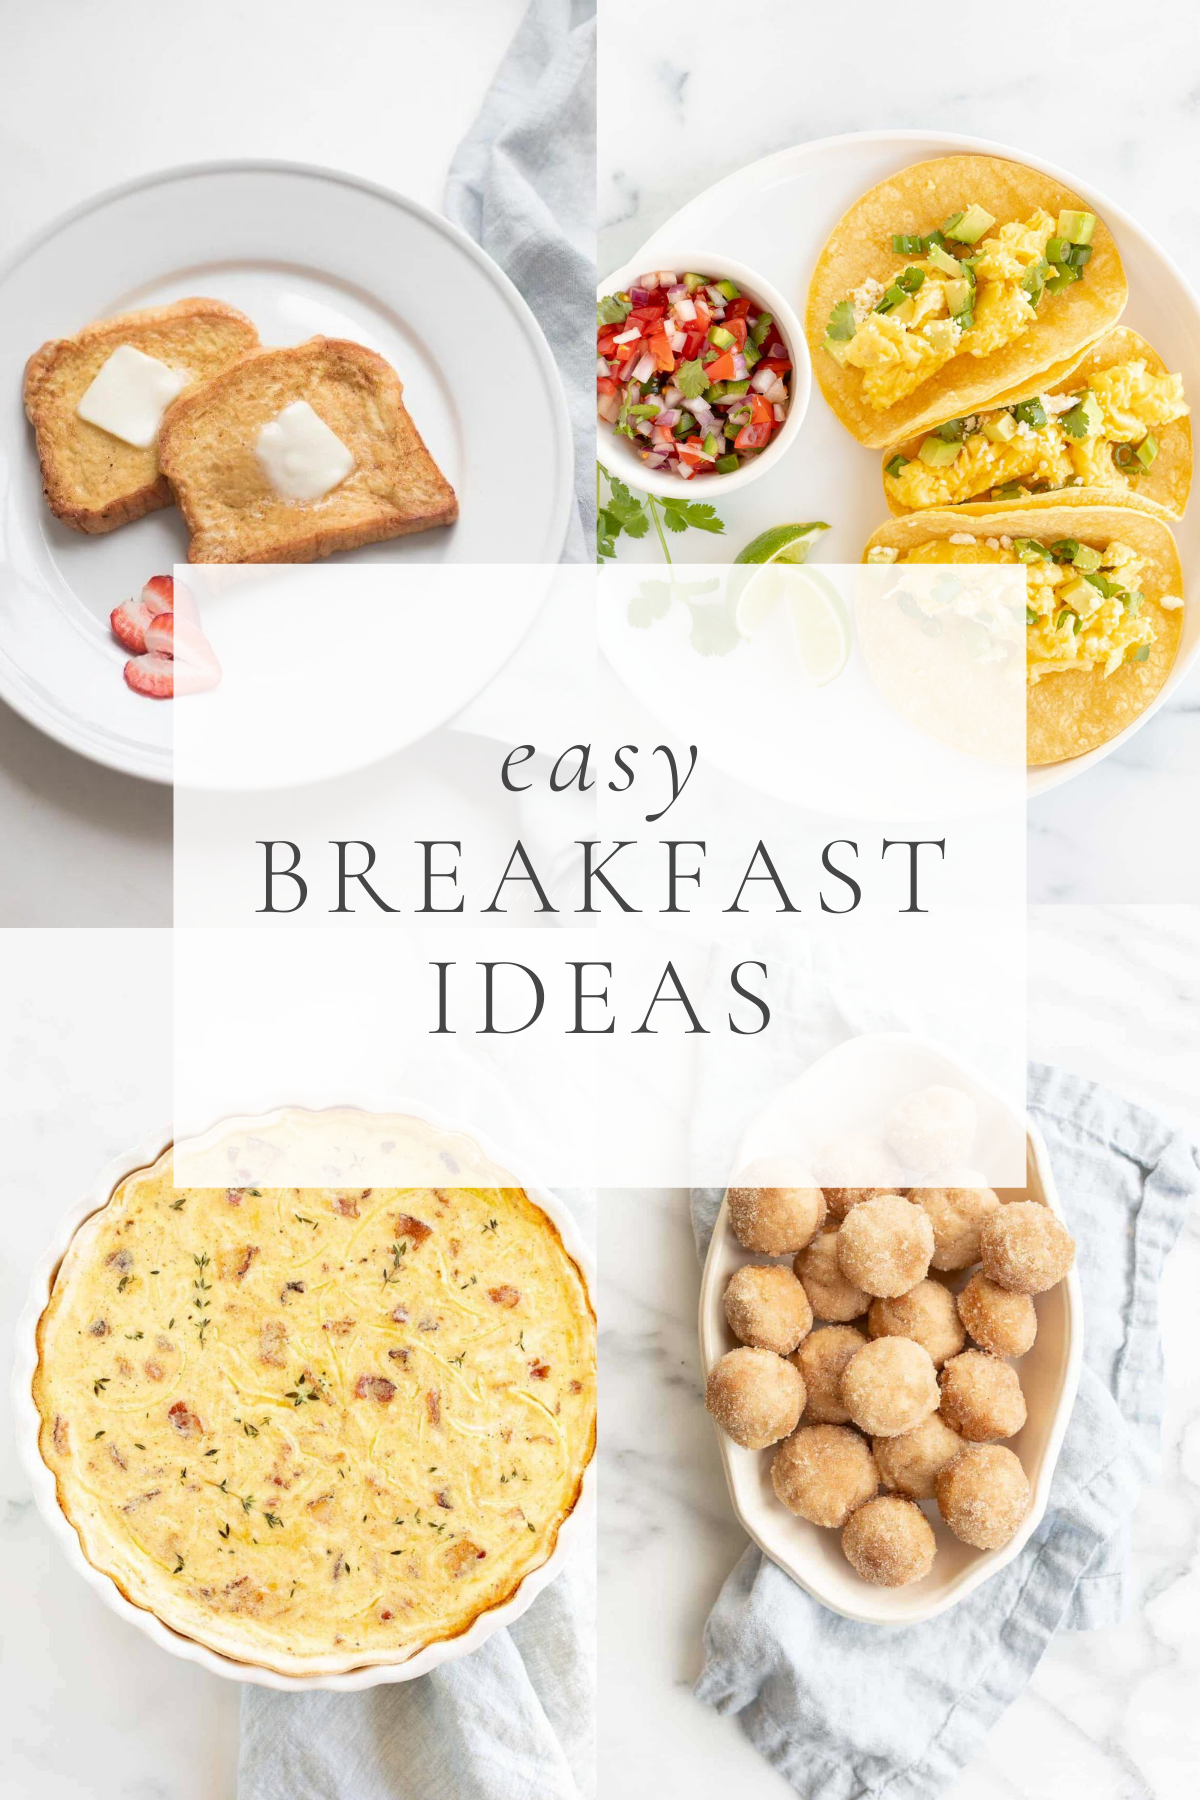 a graphic of breakfast foods with the headline "easy breakfast ideas" 